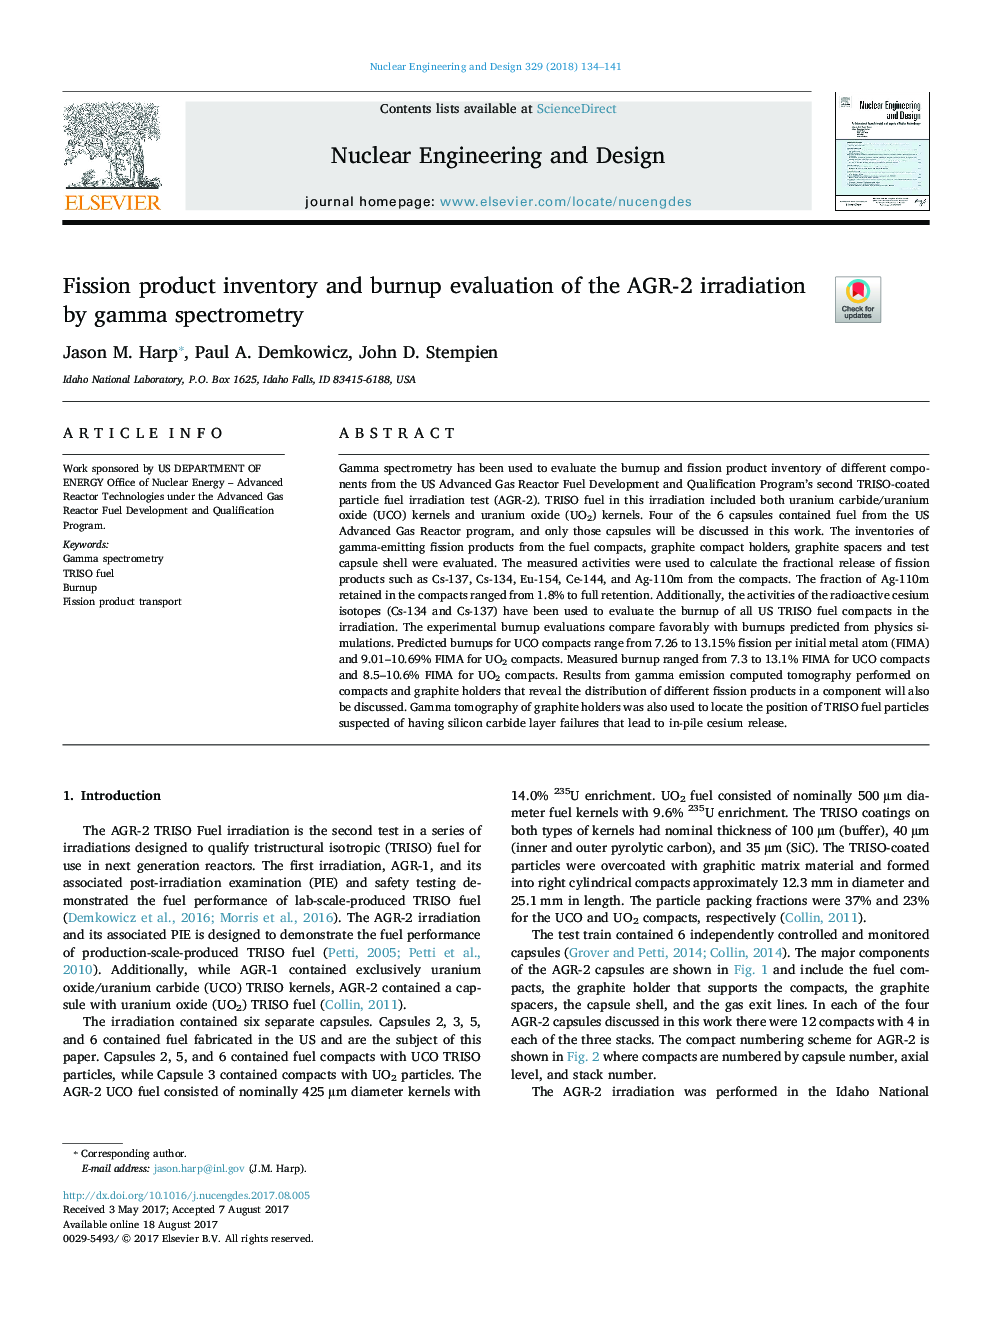 Fission product inventory and burnup evaluation of the AGR-2 irradiation by gamma spectrometry